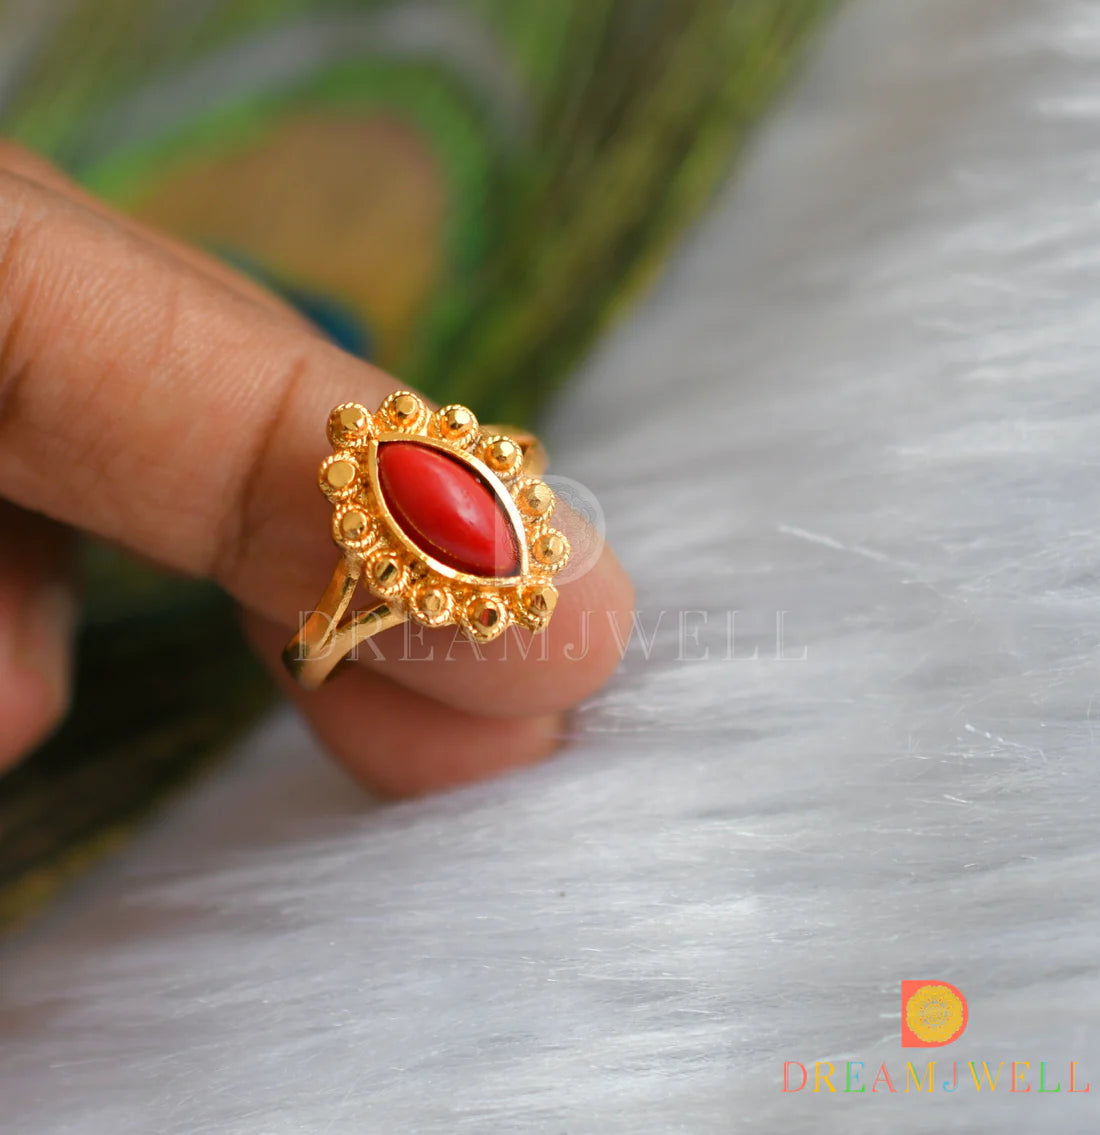 Planetaryandhealinggems - Organic Red Coral Cabochons are very powerful  Mars Gems when not wax filled, bleached or dyed. Indian Market is filled  with 95% treated Red Corals which are unfit for Vedic